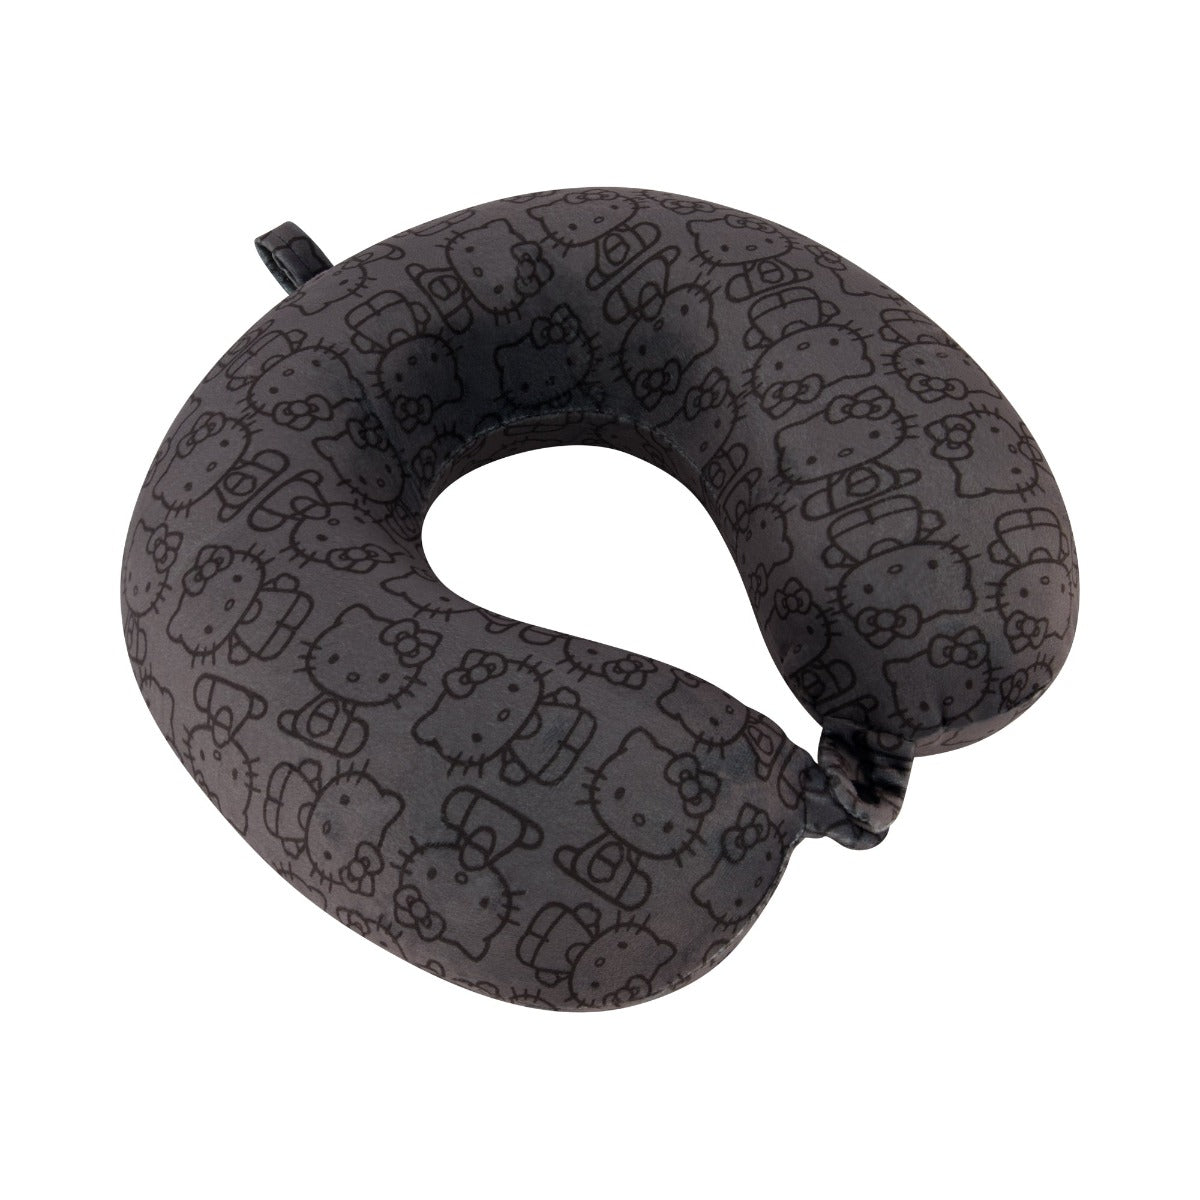 Black Ful Hello Kitty all over icon memory foam travel pillow - best neck pillows